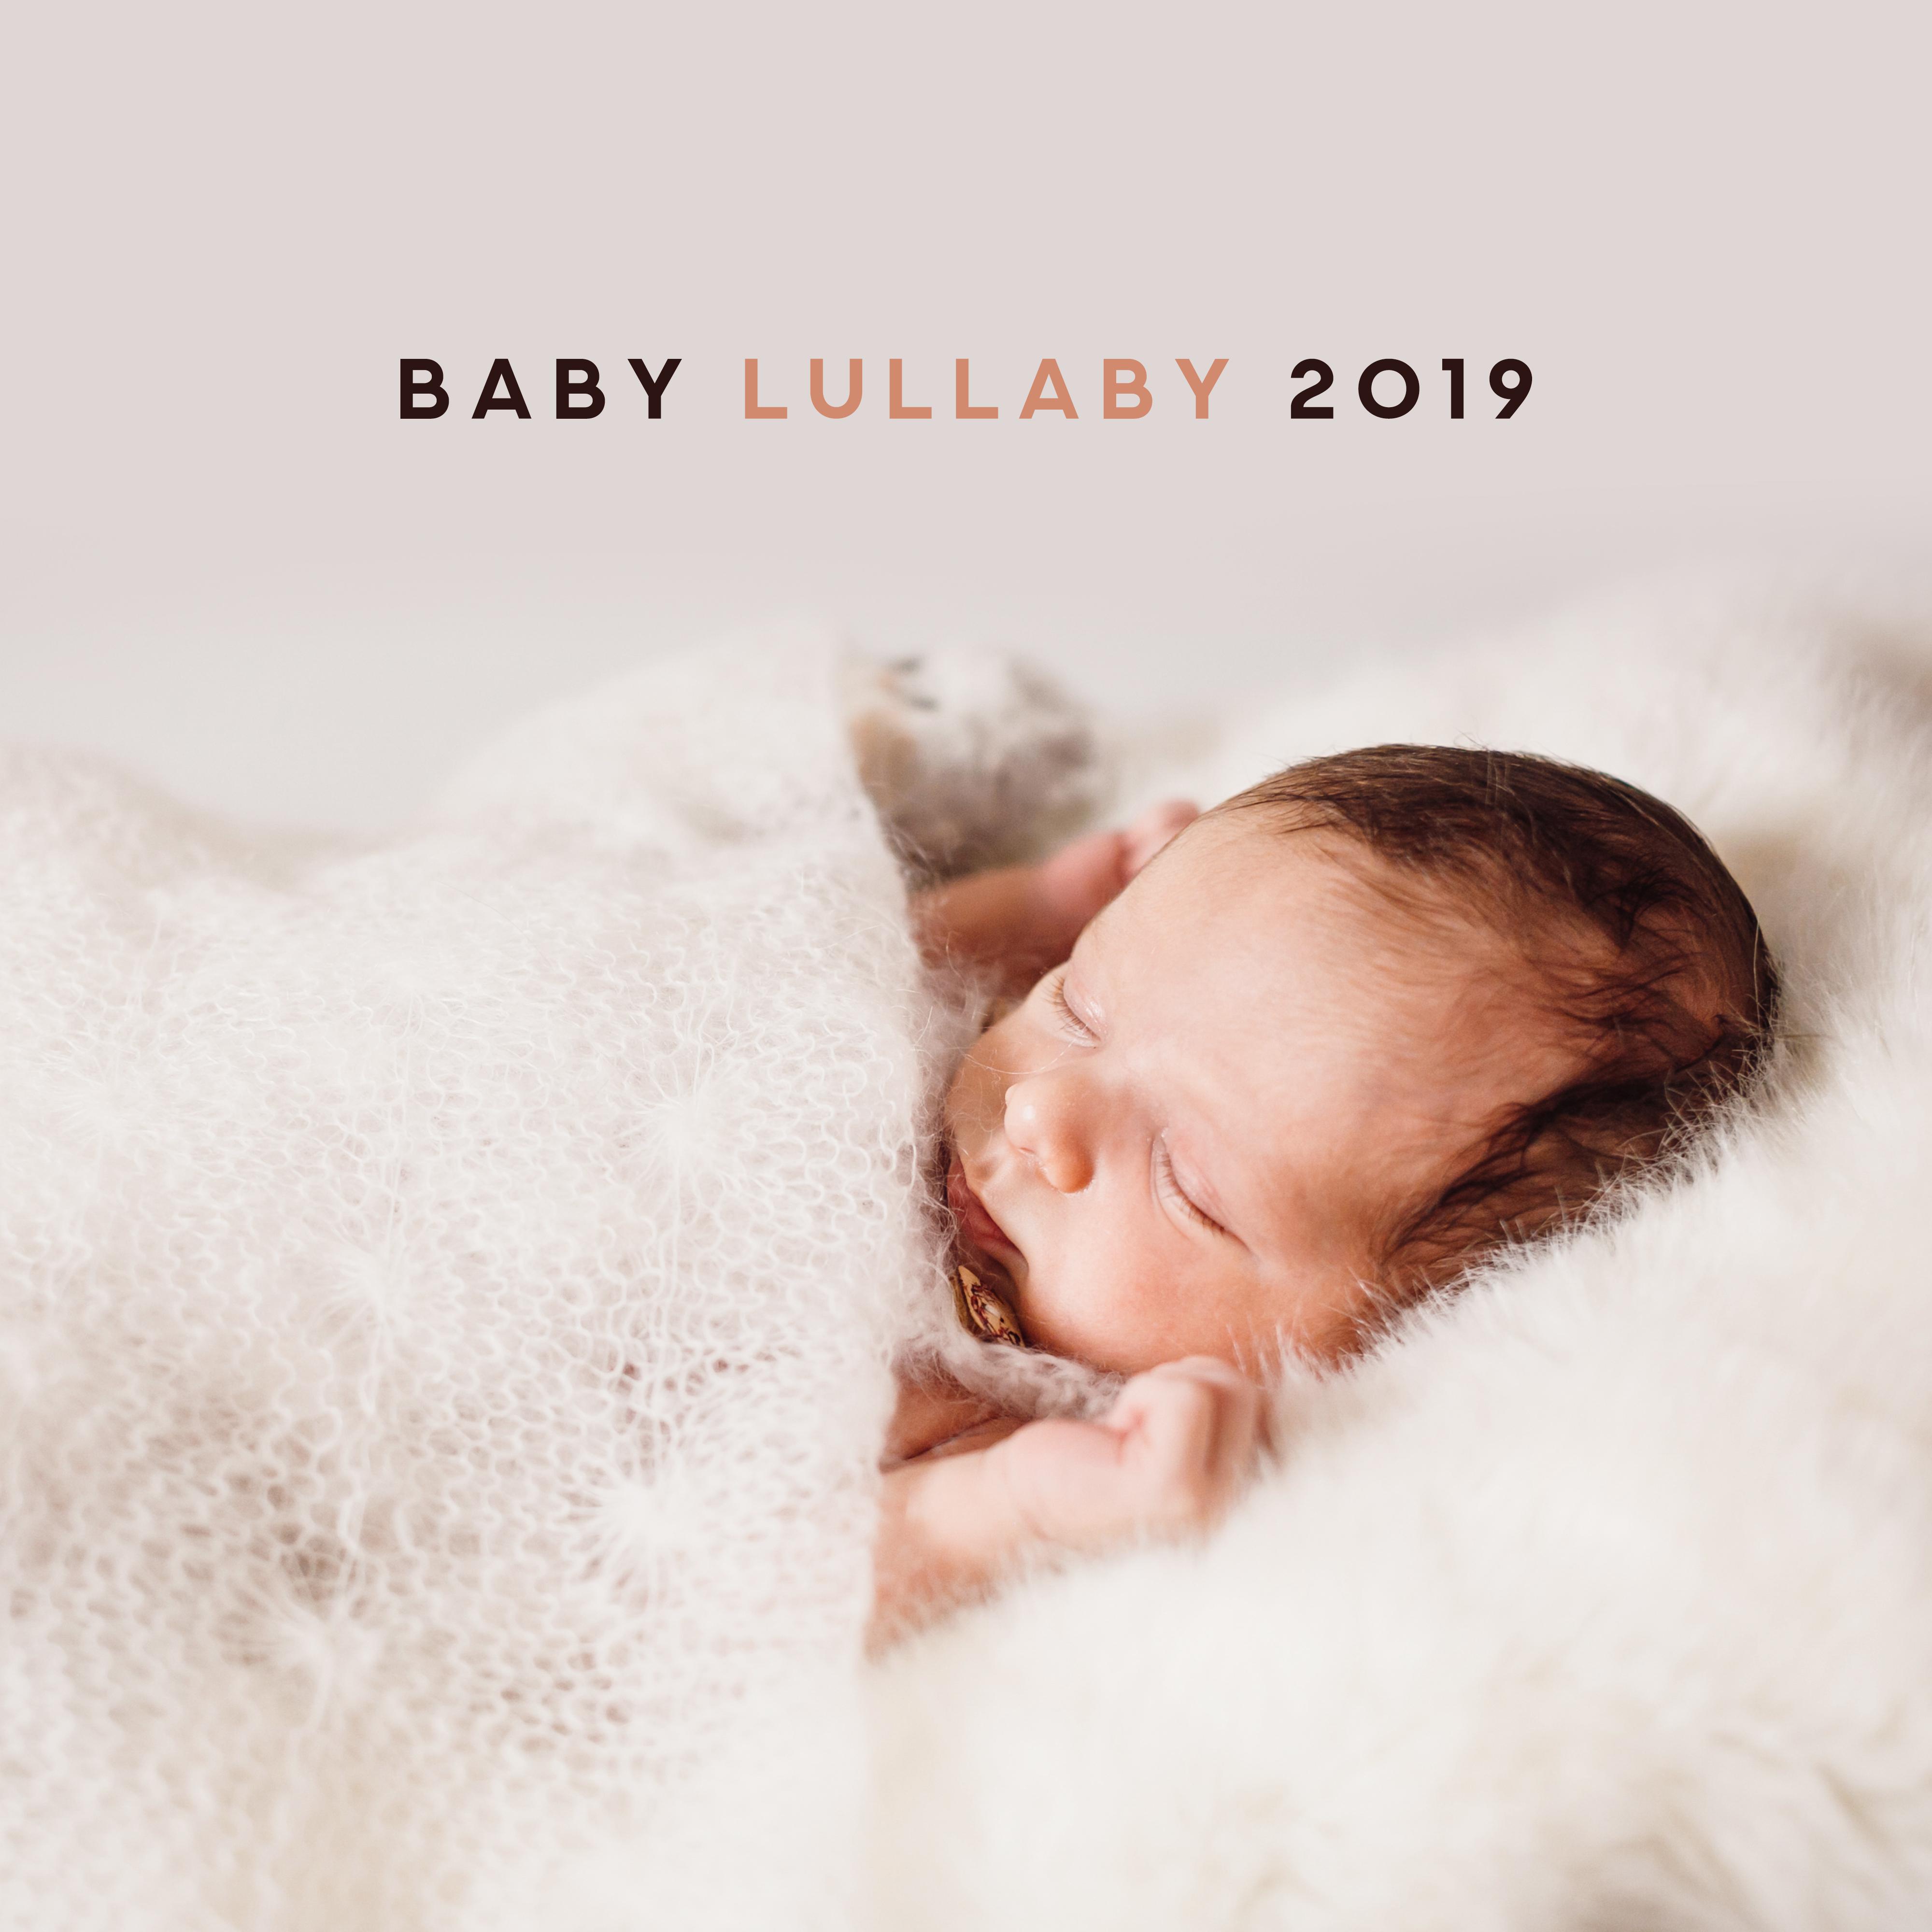 Baby Lullaby 2019  Relaxing Music for Baby, Sleep Songs for Kids, Baby Music at Night, Soothing Sounds to Calm Down